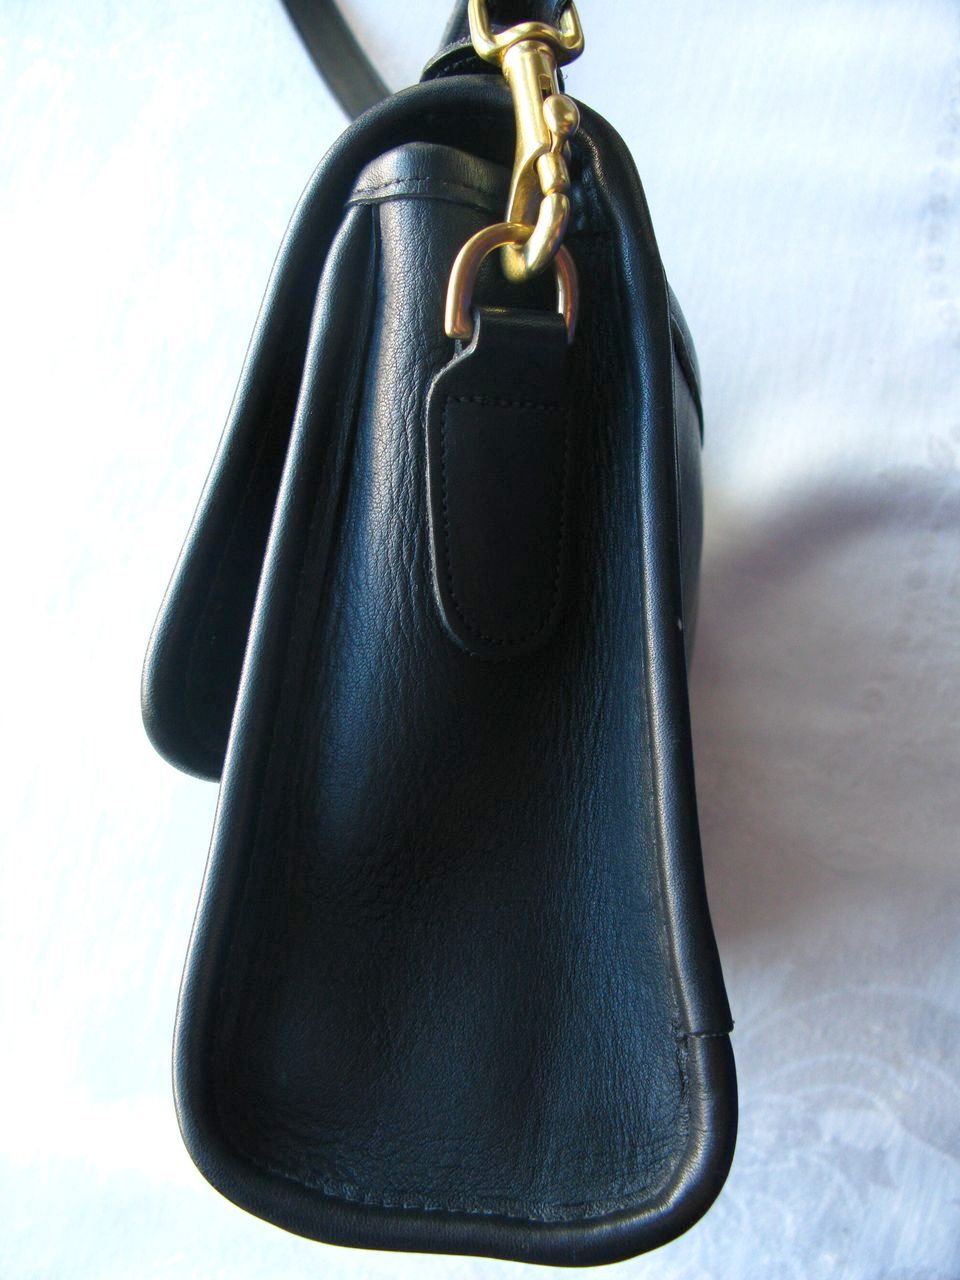 Vintage COACH U.S.A. Black Leather Court Bag from seasonspast on Ruby Lane